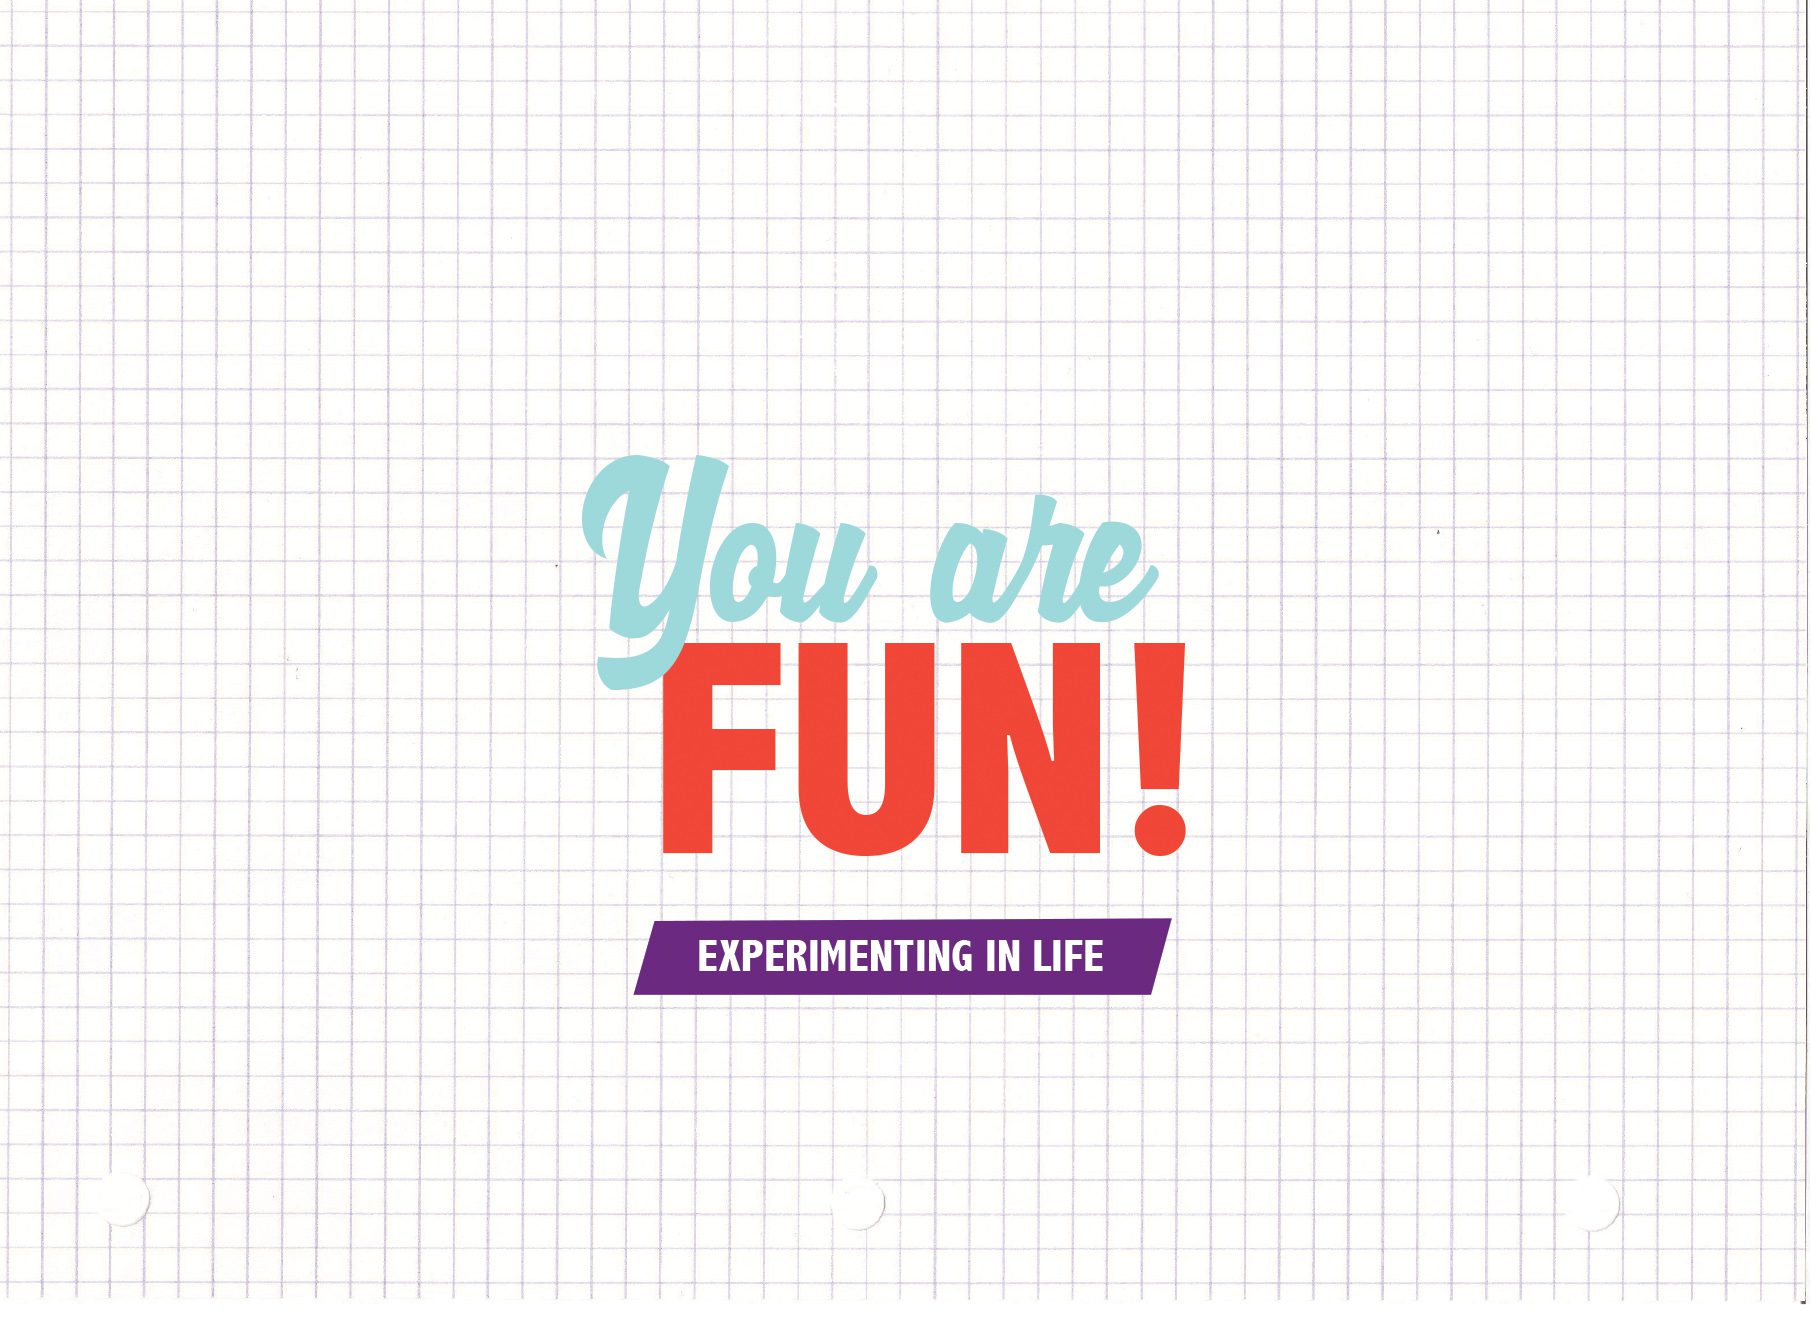 You are Fun: Experimenting in Life Infographic